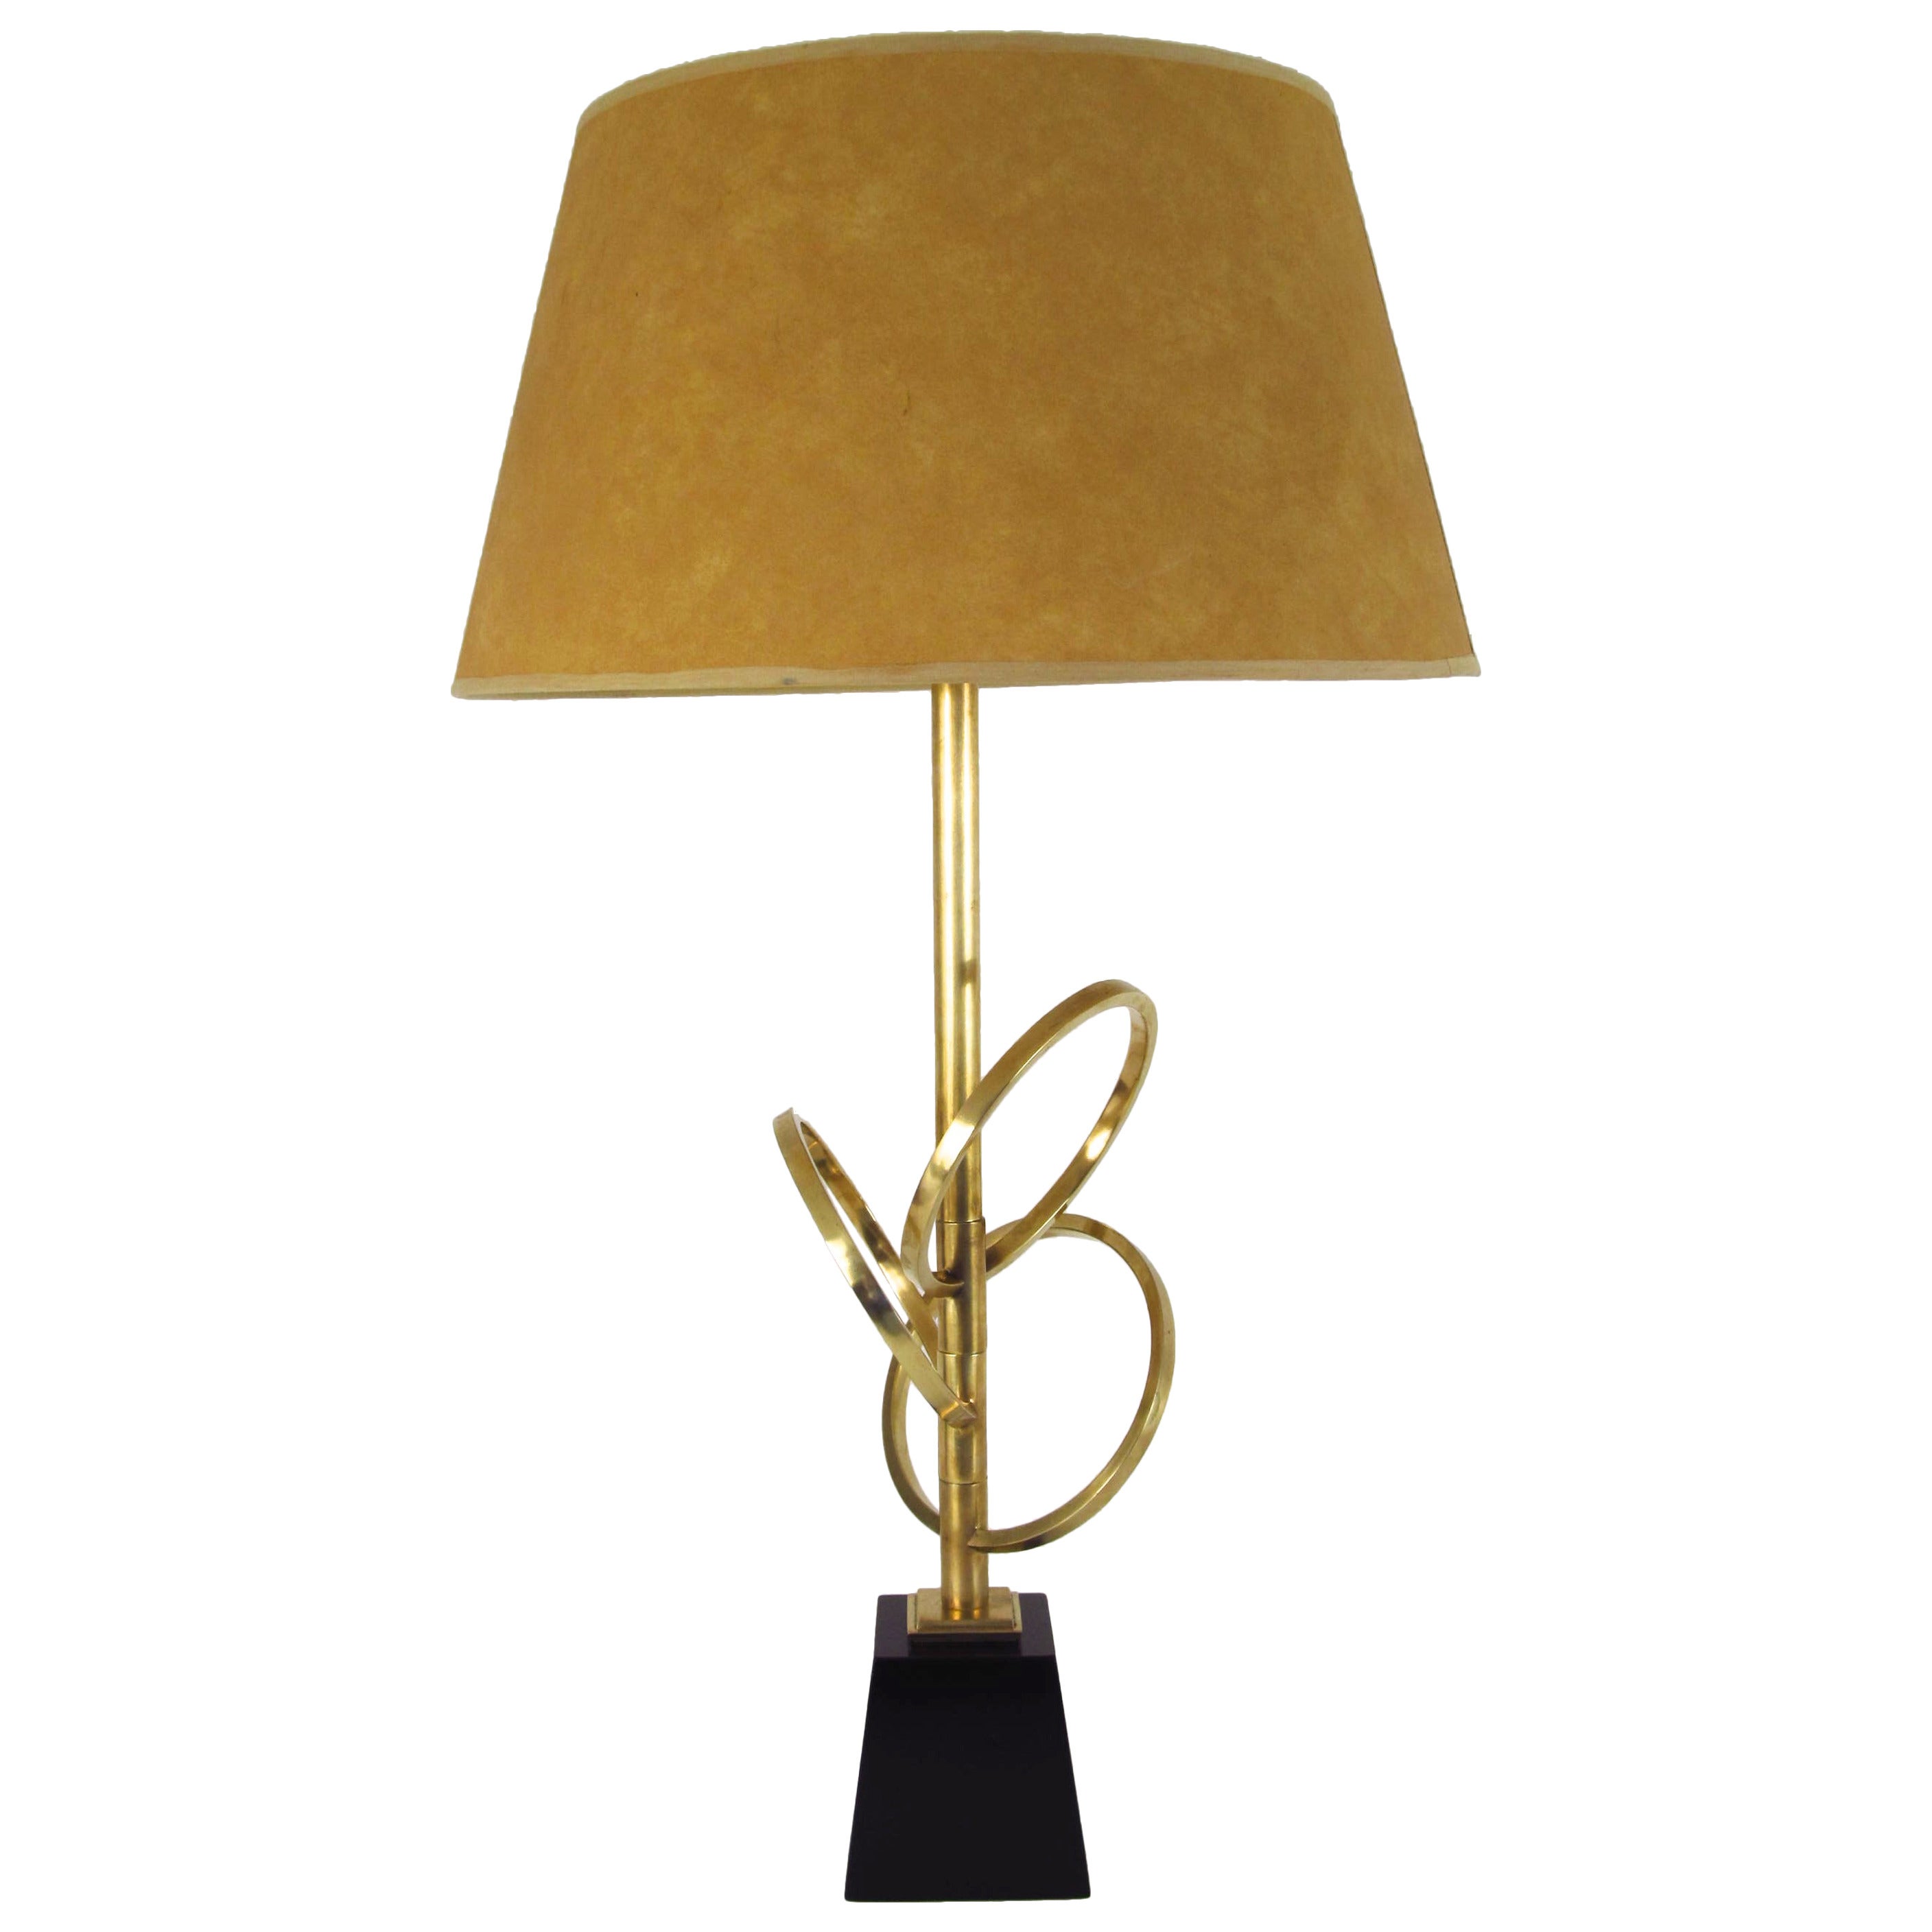 Sculptural Brass Table Lamp with Three "Floating" Brass Rings